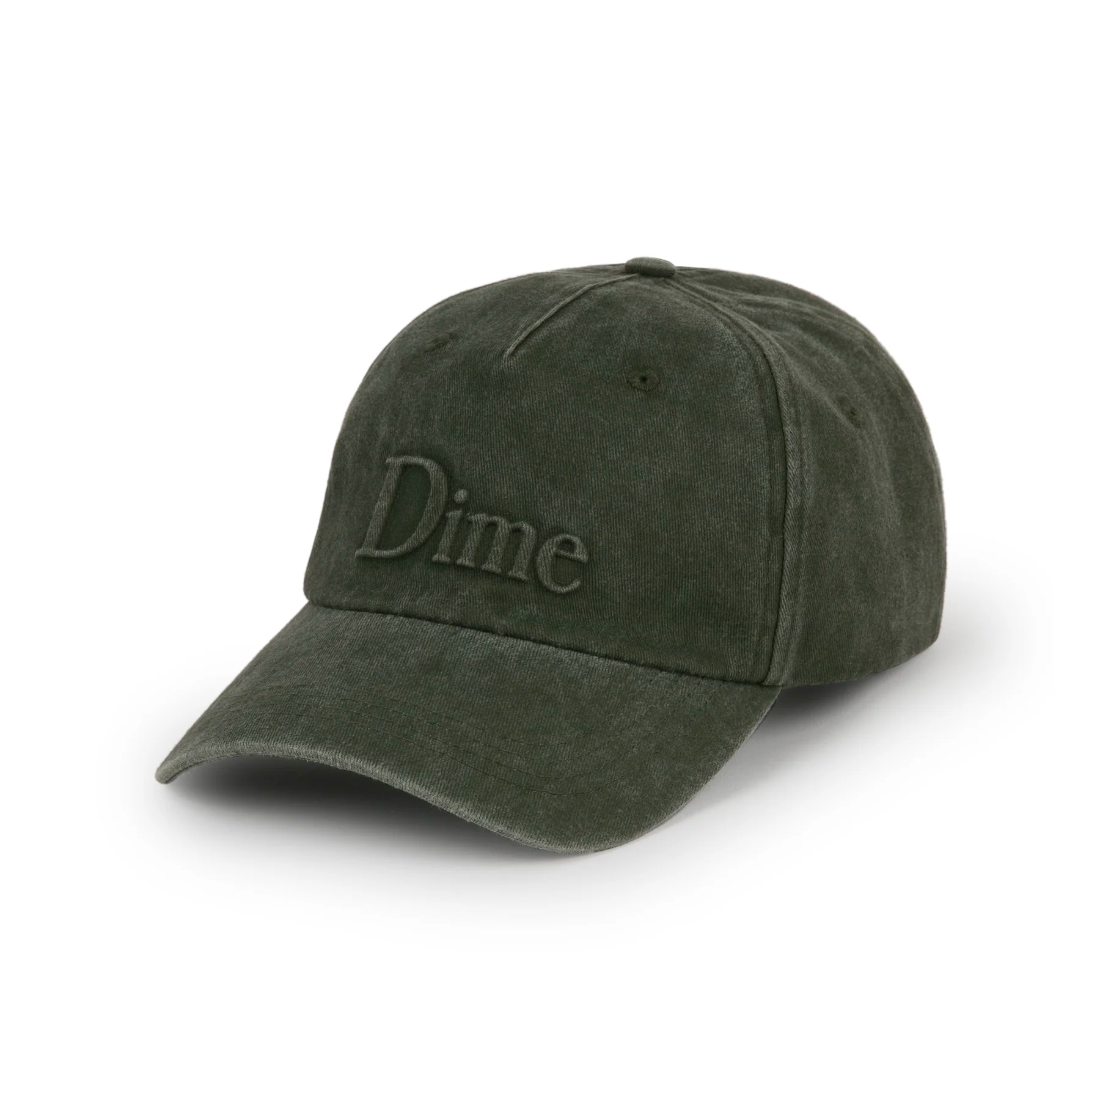 【Dime】Classic Embossed Uniform Cap - Military washed